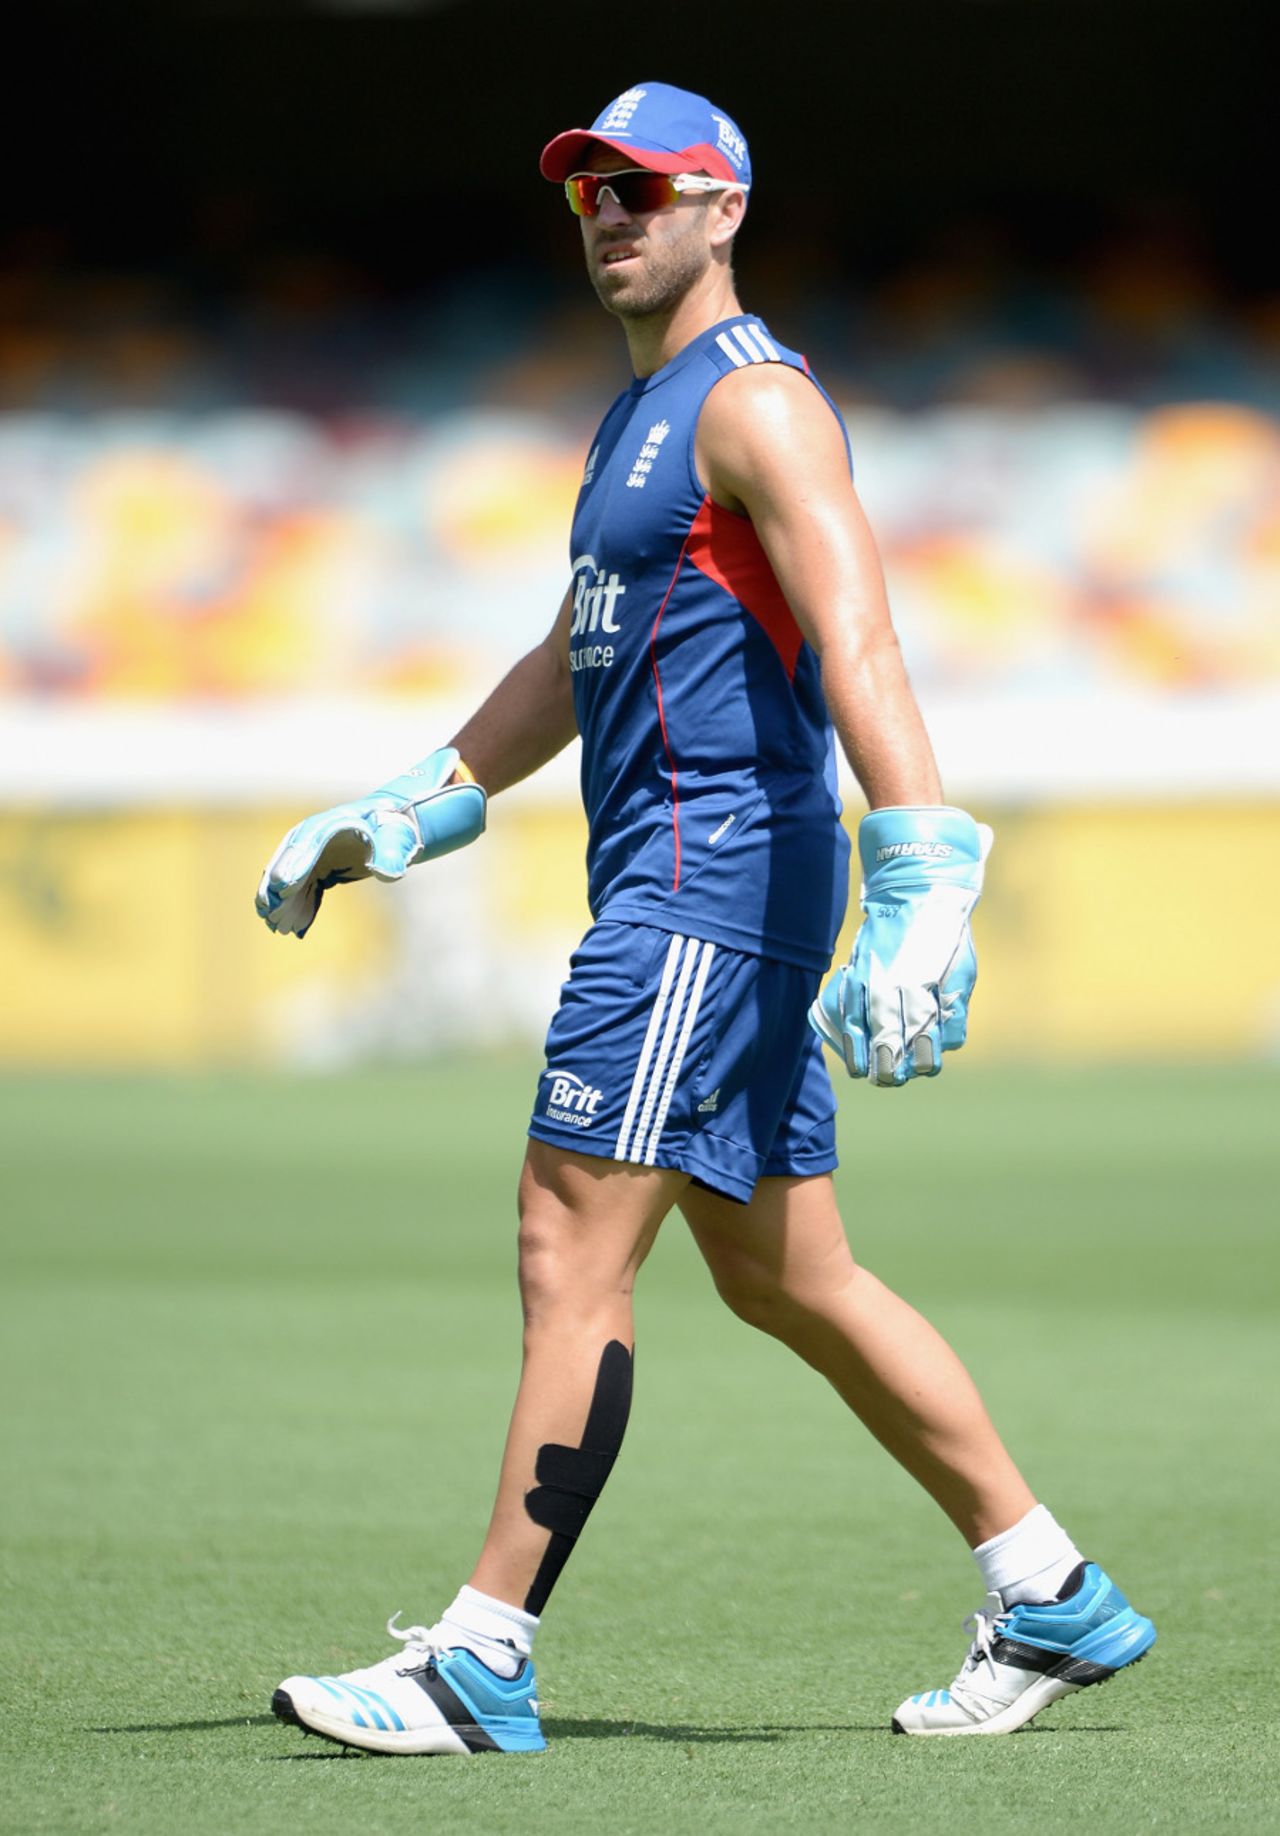 Matt Prior continued to train with strapping on his injured calf, Brisbane, November 19, 2013